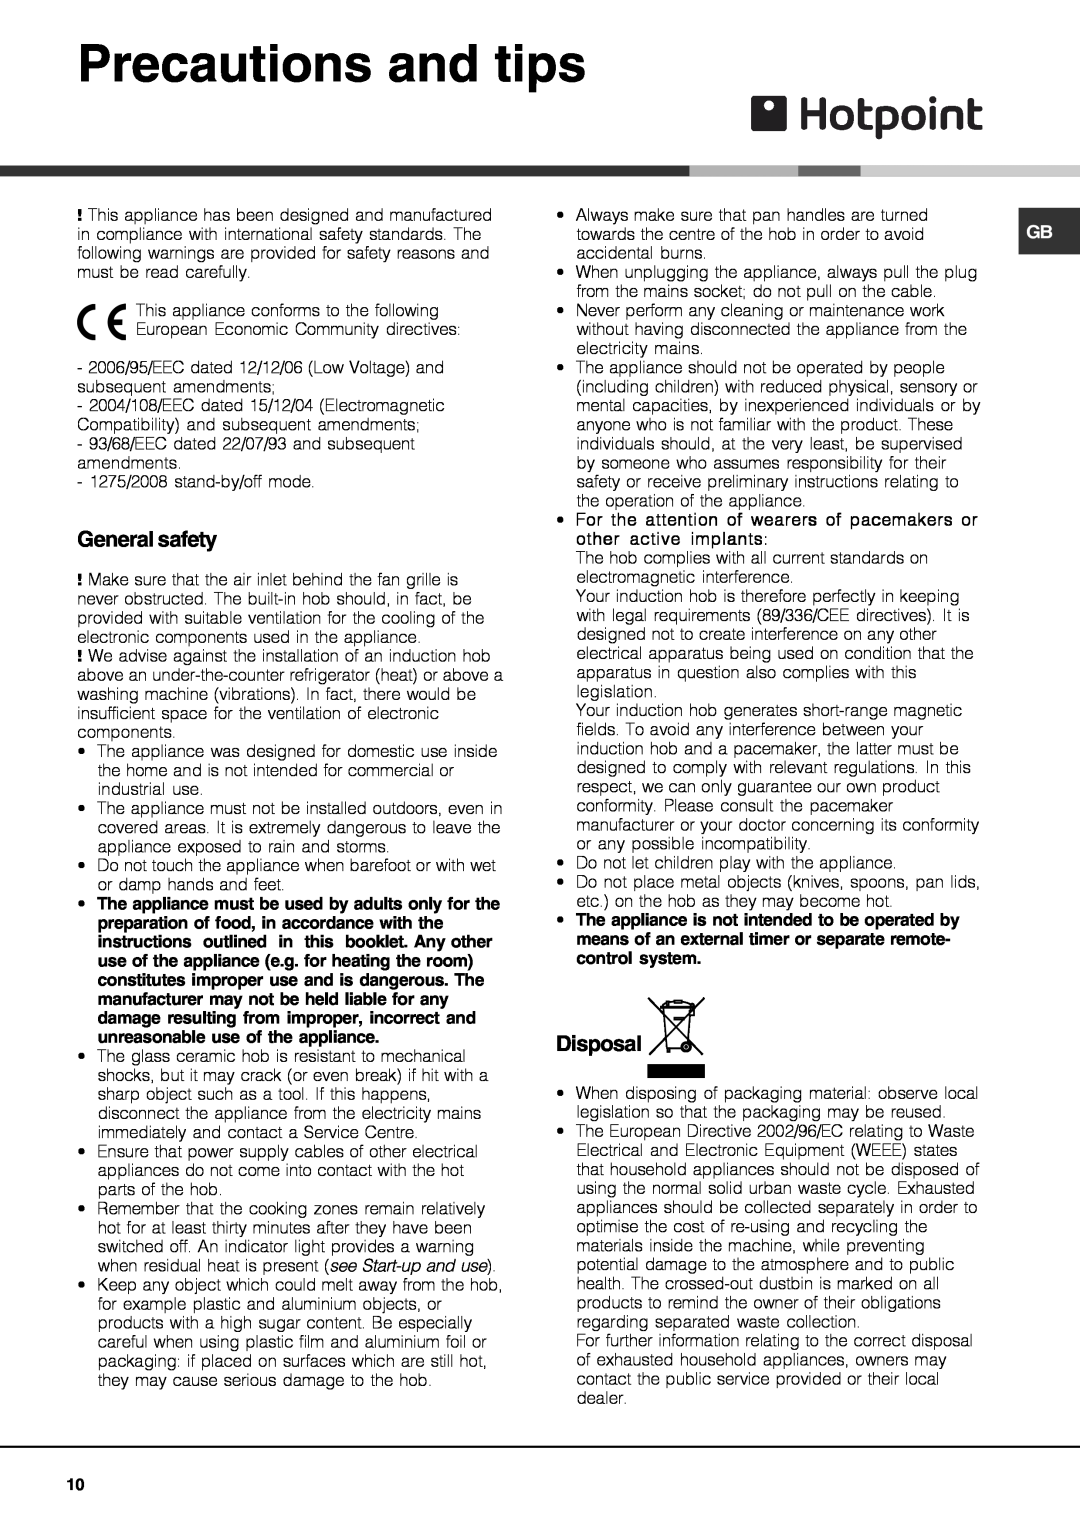 Hotpoint CIA 641 C S, CIC 642 C operating instructions Precautions and tips, General safety, Disposal 